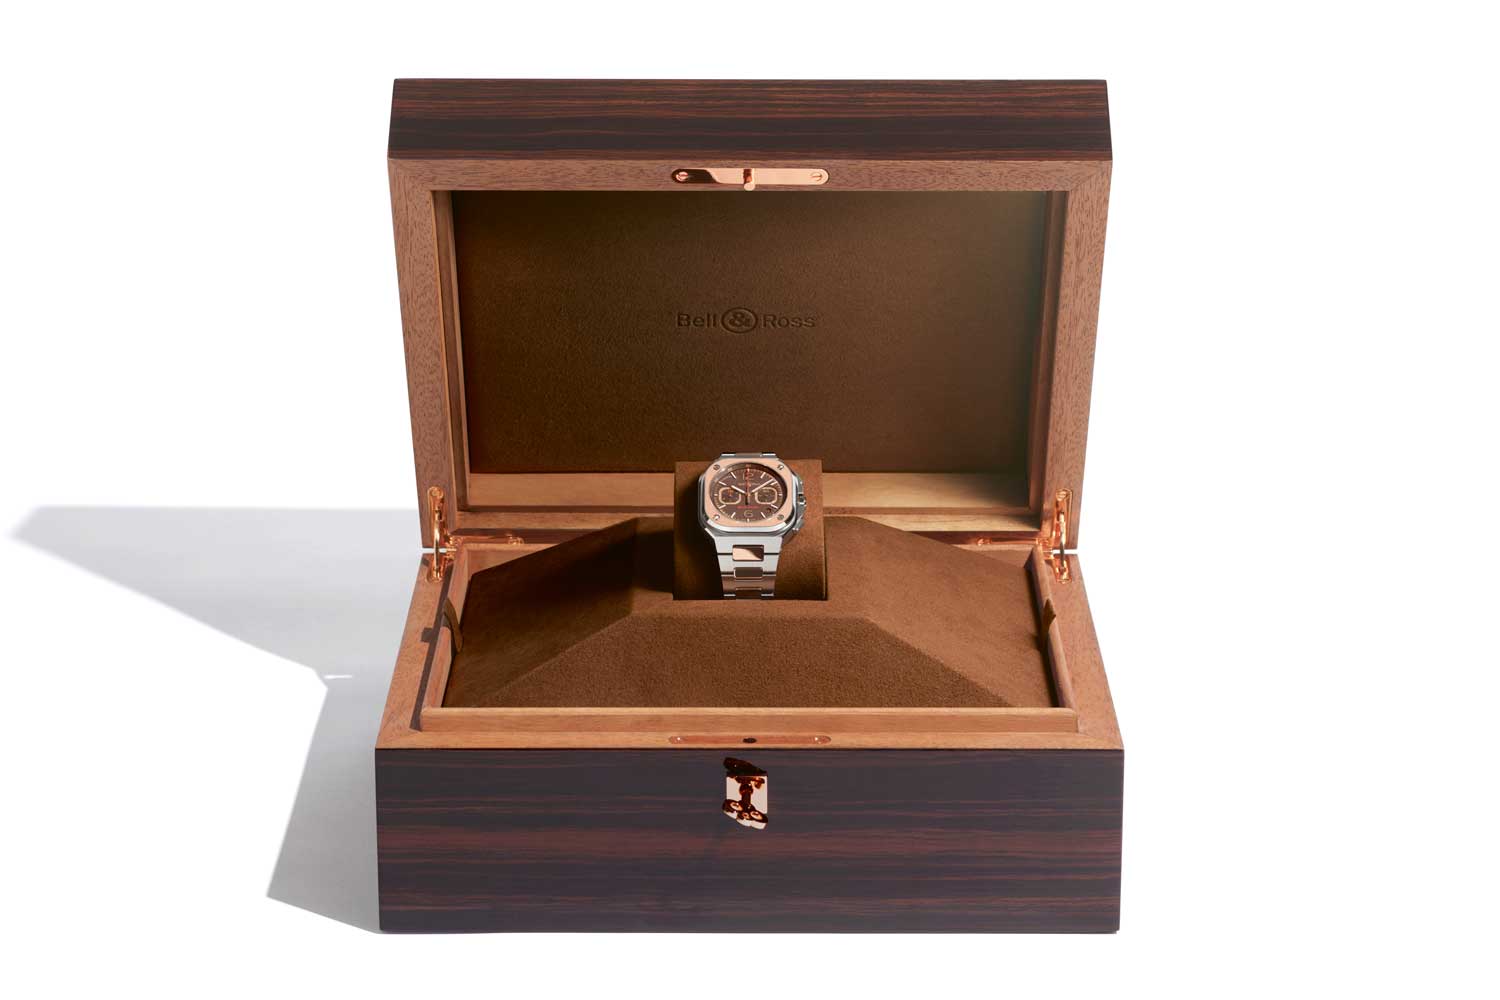 BR 05 Chrono Edición Limitada is delivered in a wooden box varnished in a rich ebony on the outside and cedar wood on the inside, which can be used as a functional humidor